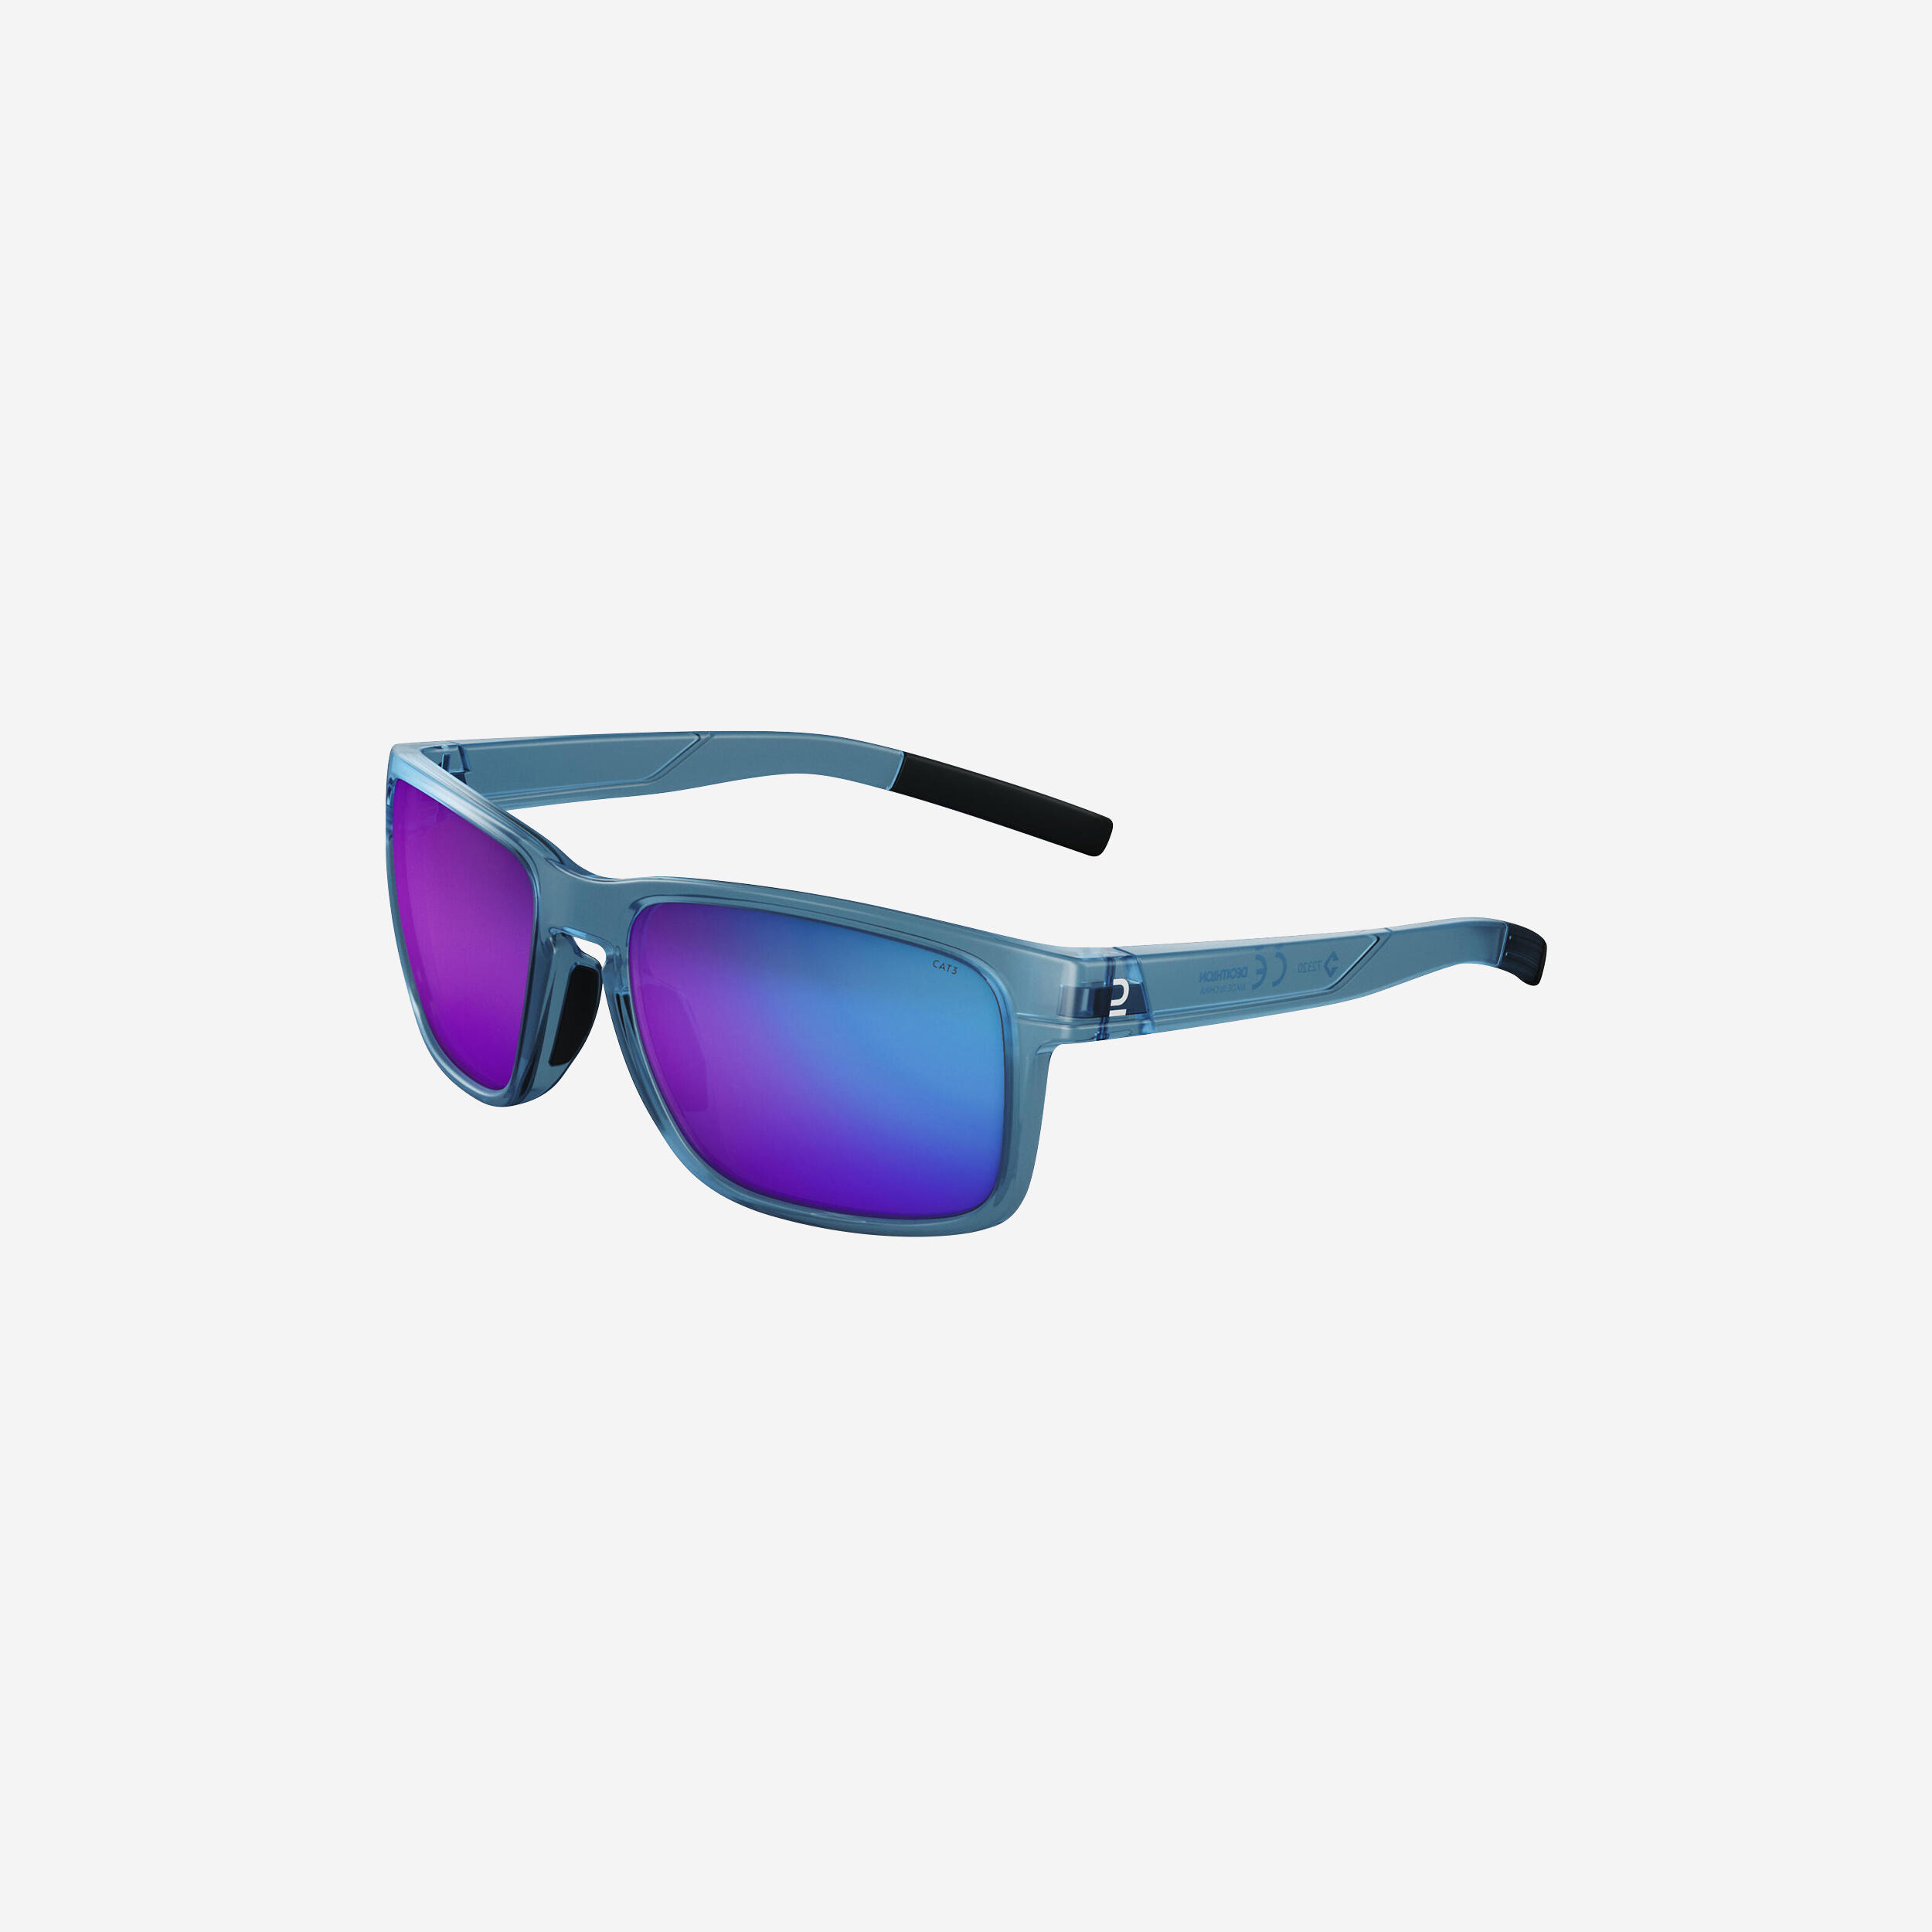 Adult hiking sunglasses – MH530 – Category 3 1/9